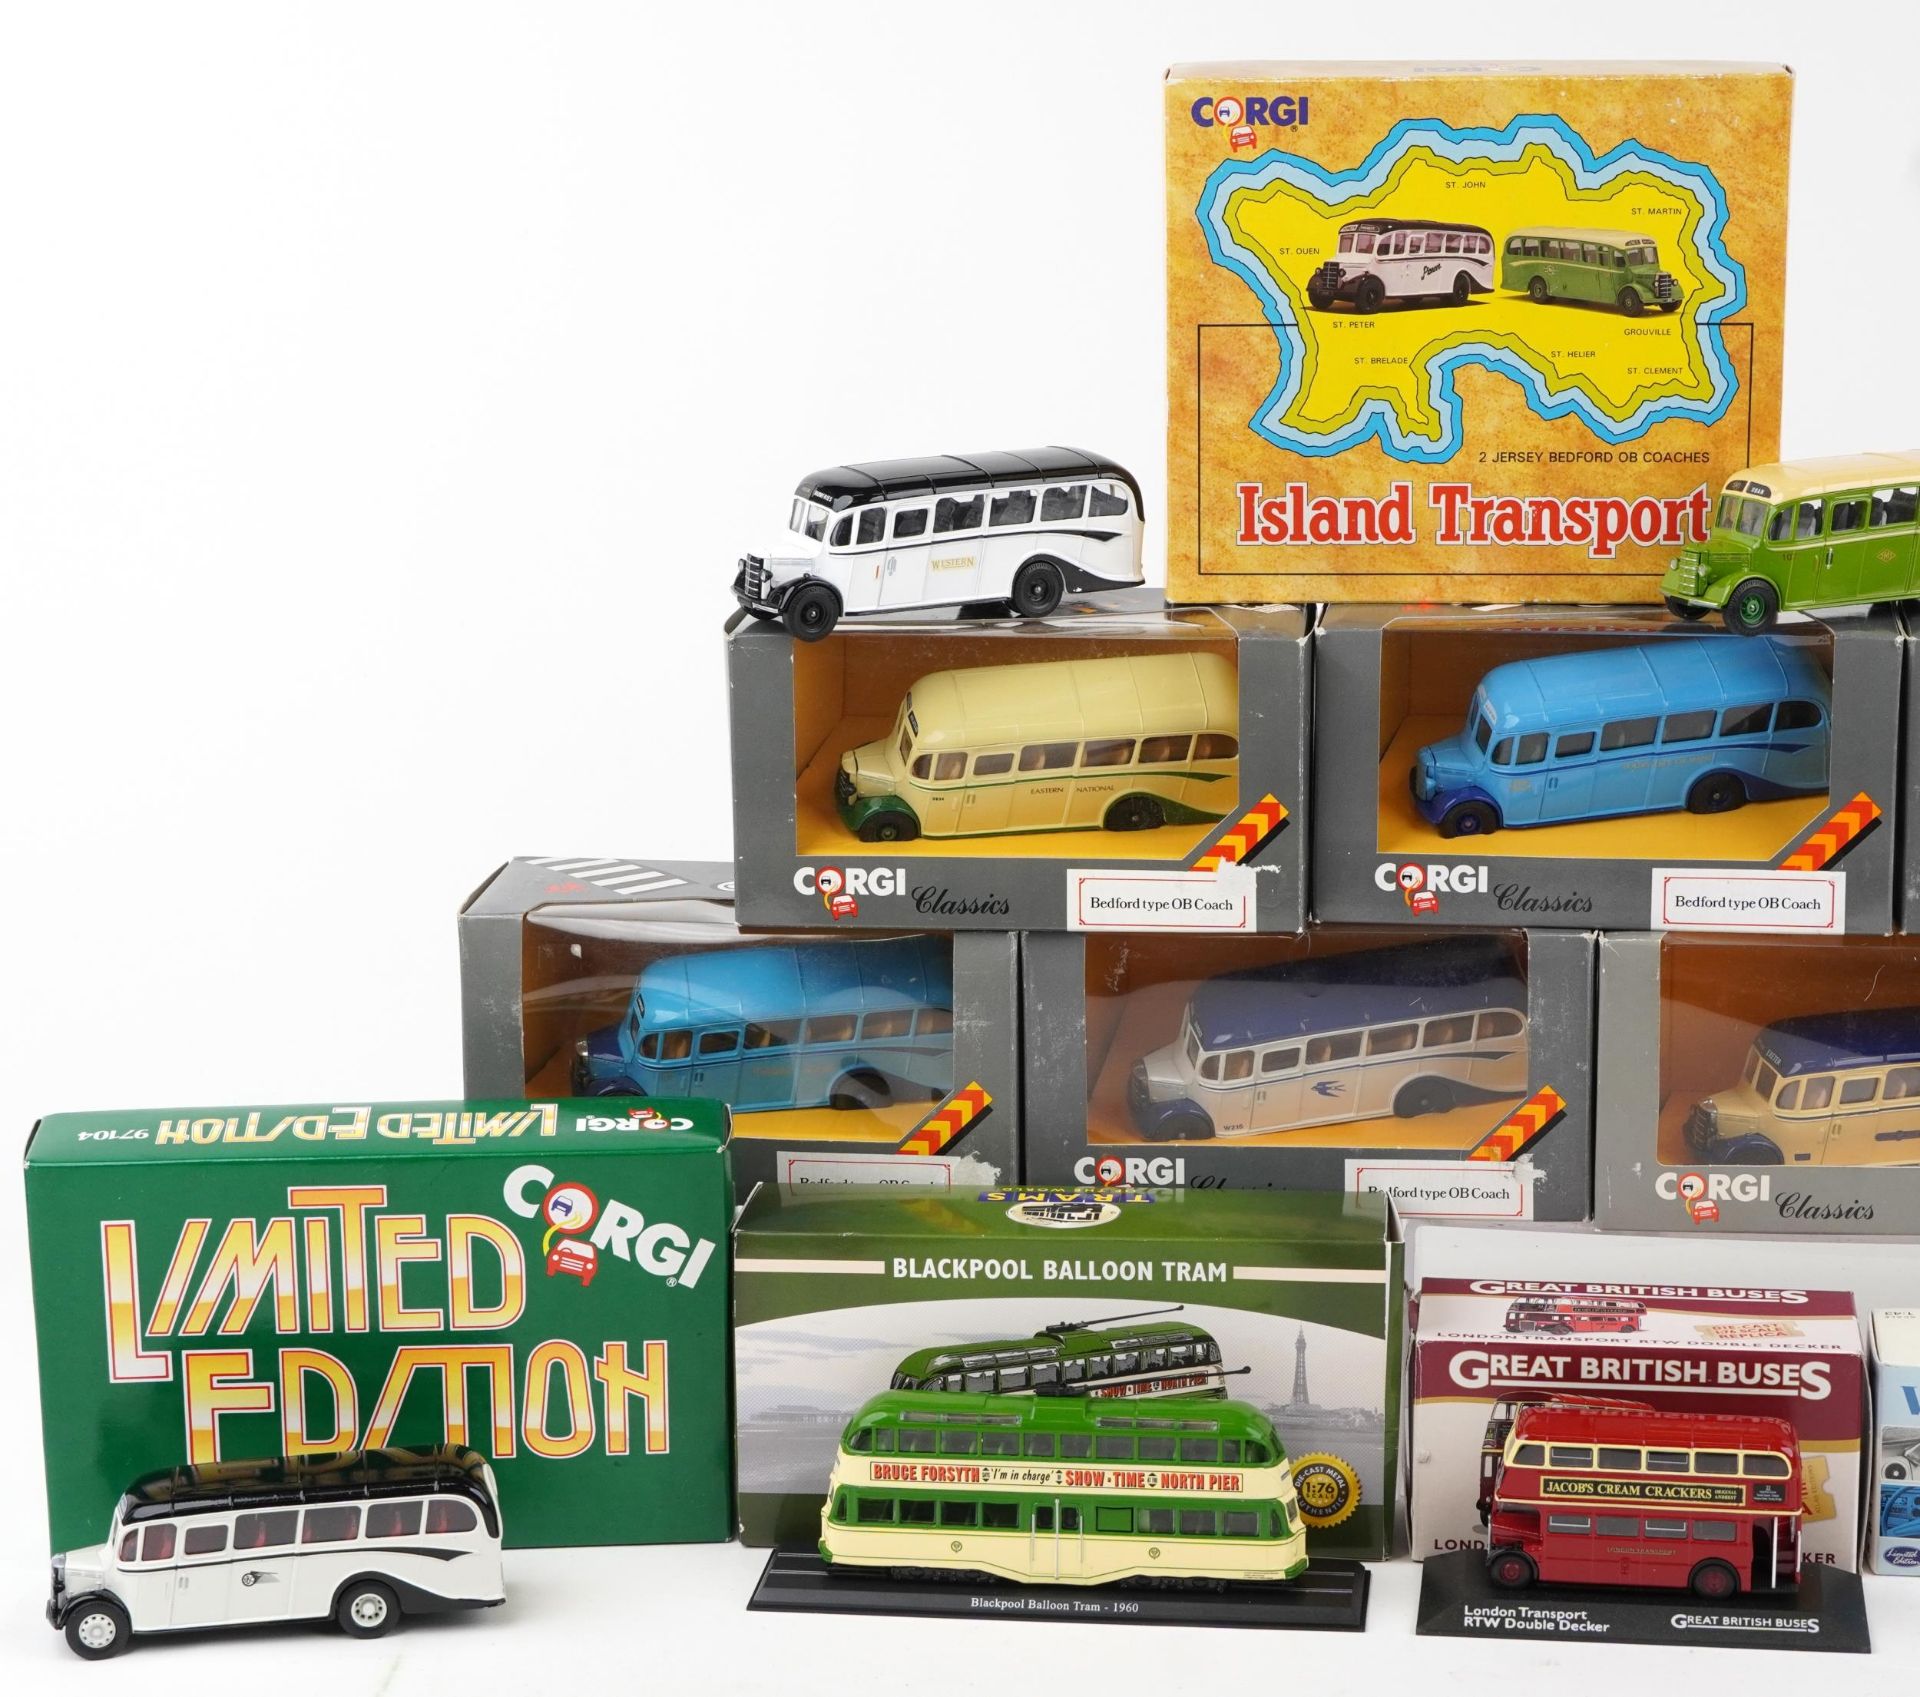 Diecast model predominantly buses and related with boxes including Corgi Classics and Trams of the - Image 2 of 3